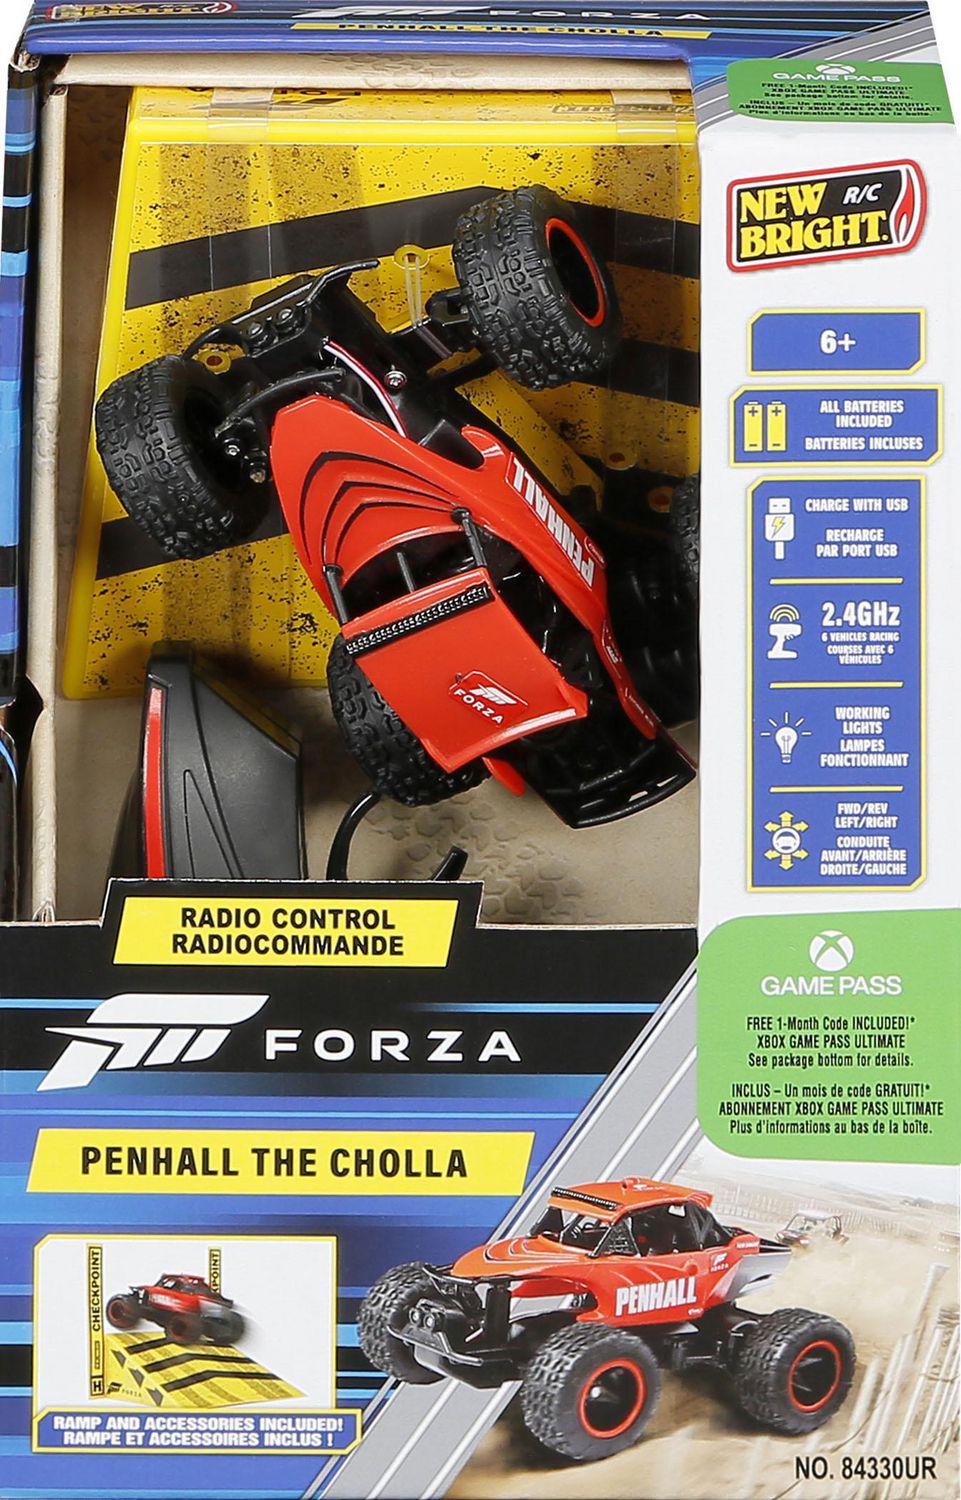 New Bright 1:43 Scale Forza Penhall RC Buggy Ramp Set, 1:43 Forza RC Buggy  Ramp Set